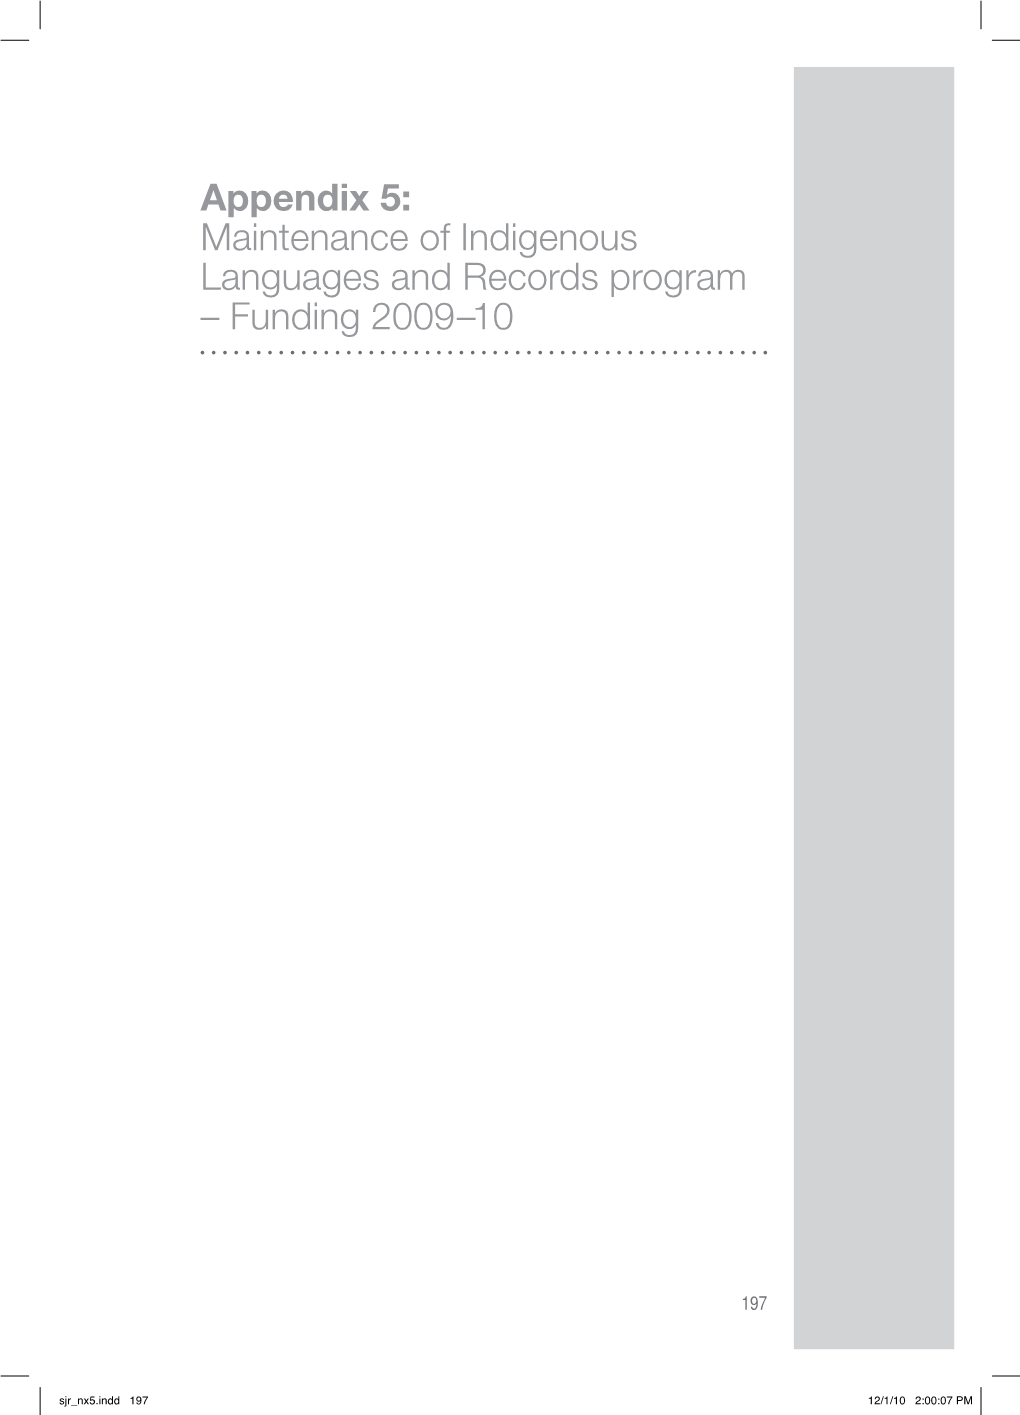 Maintenance of Indigenous Languages and Records Program – Funding 2009–10